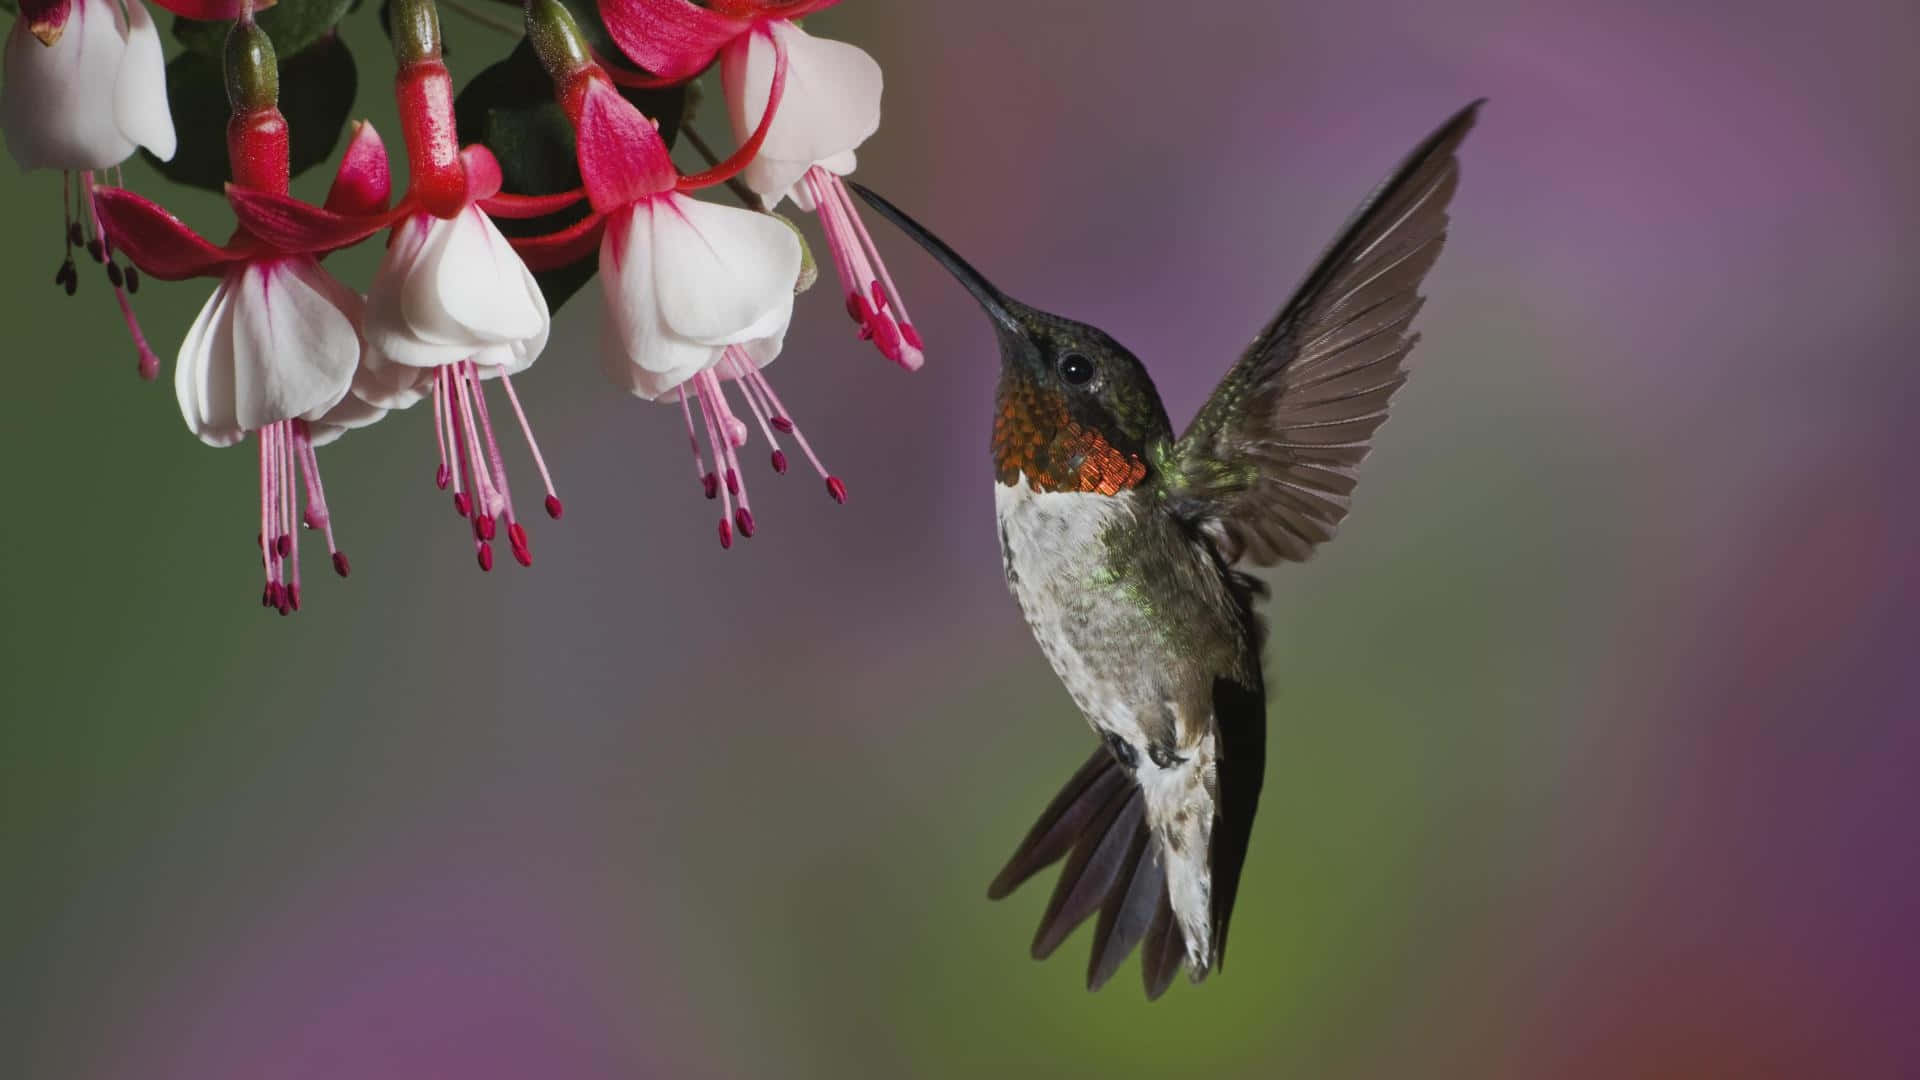 A colorful hummingbird surrounded by a vibrant background